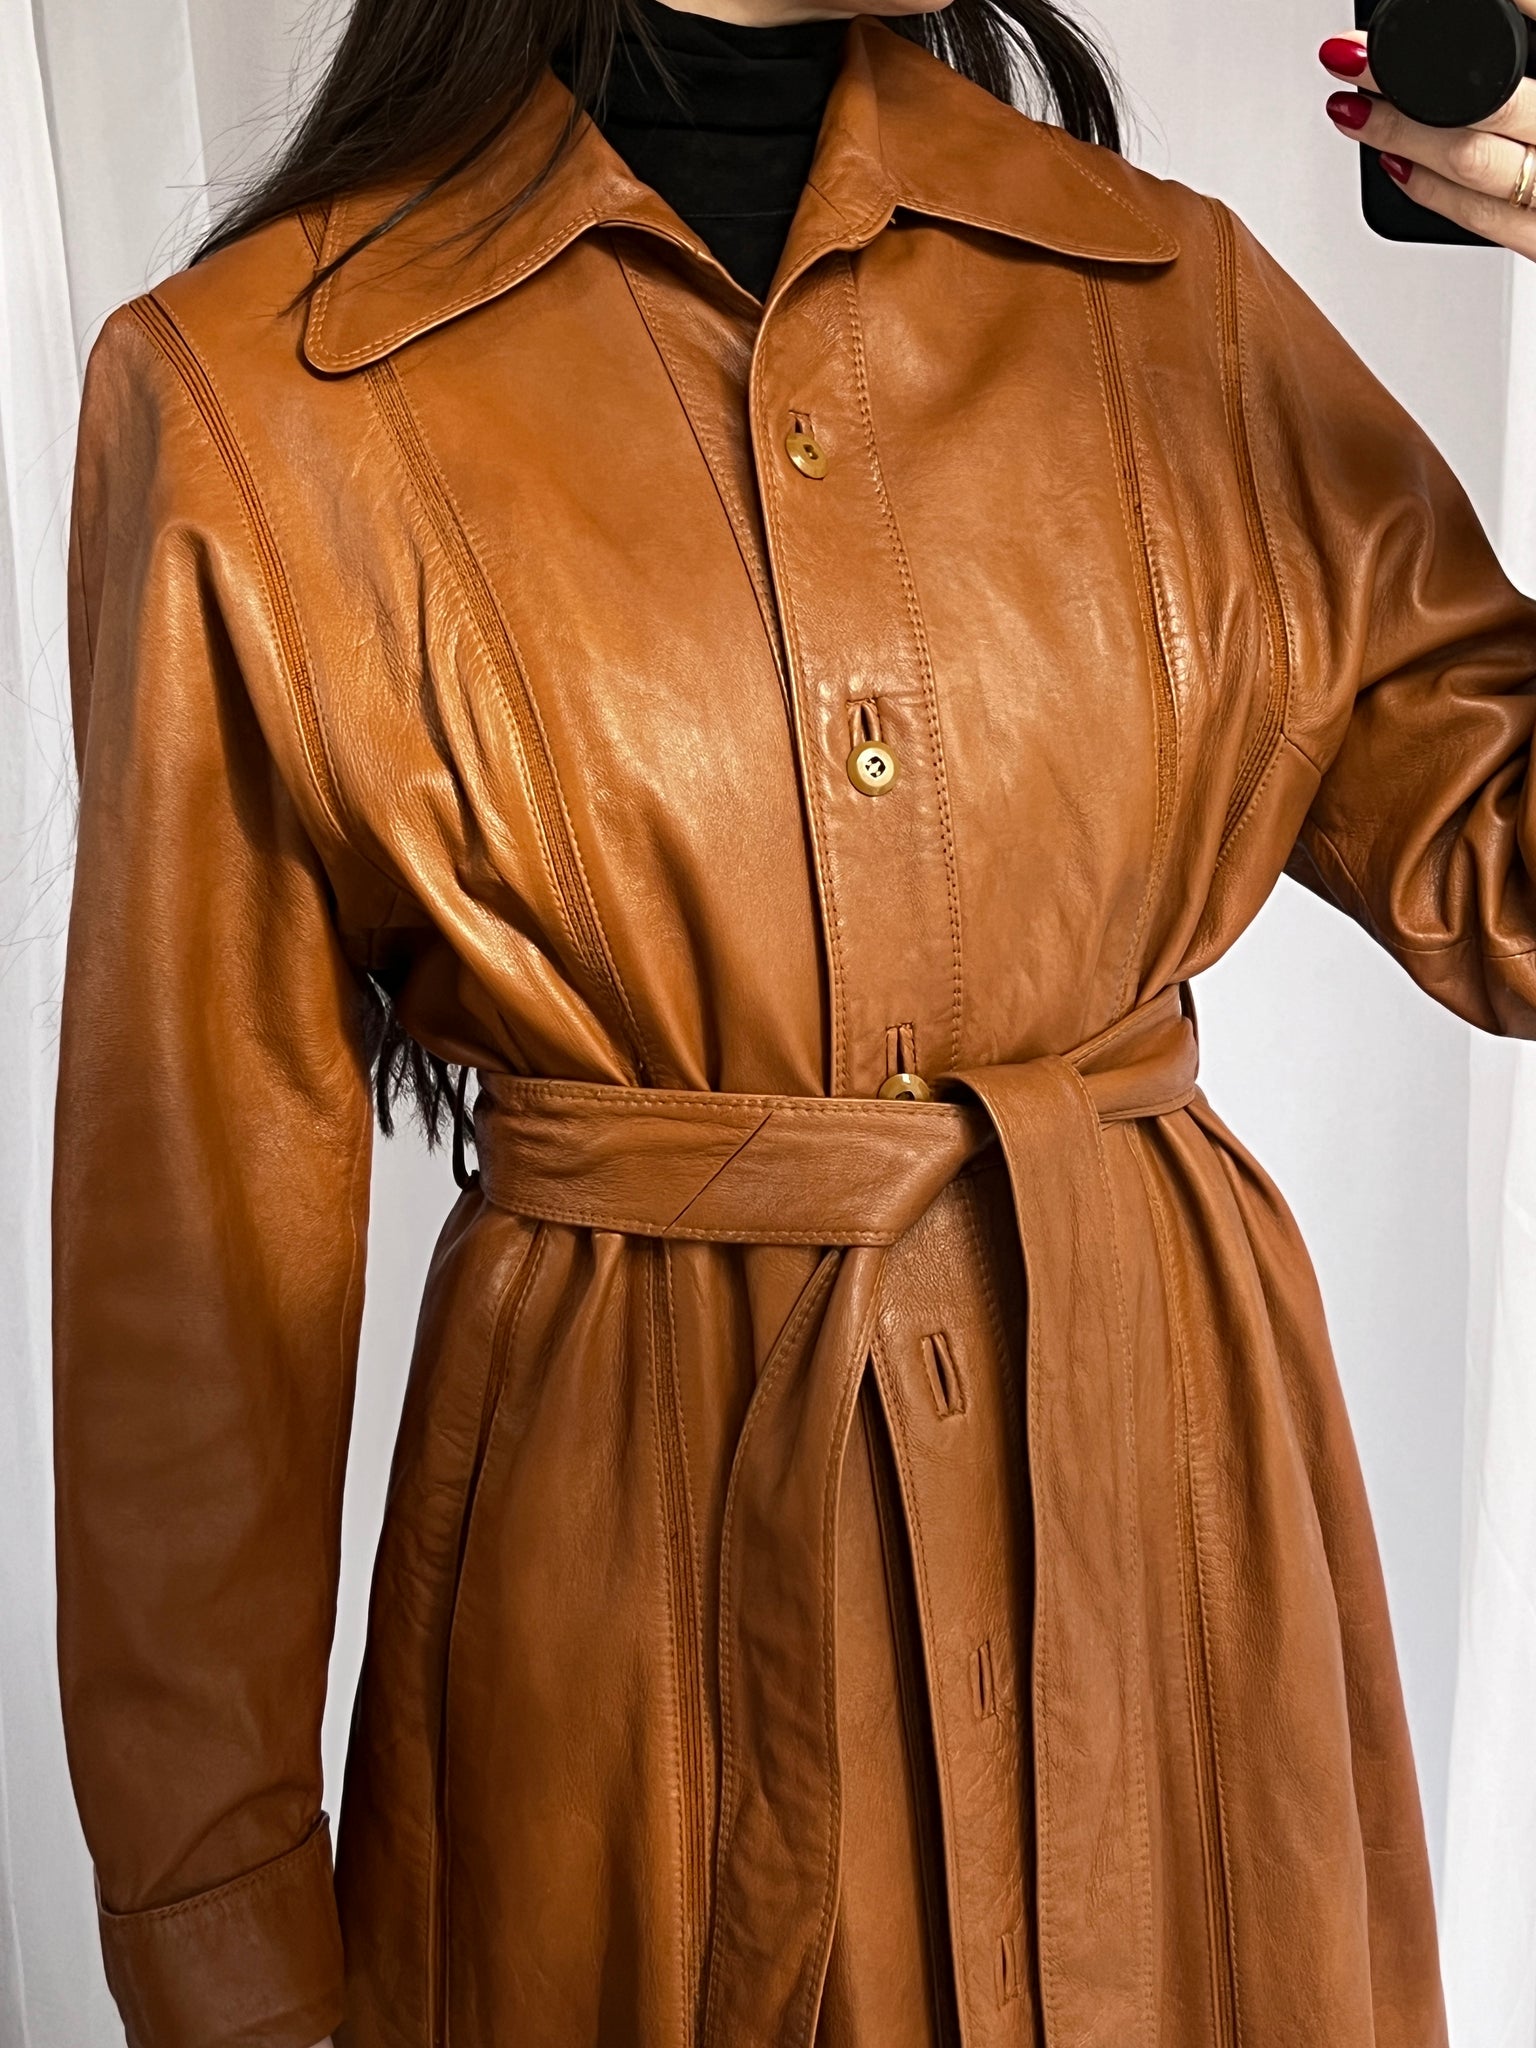 1970s Imperial leather trench with knit seams